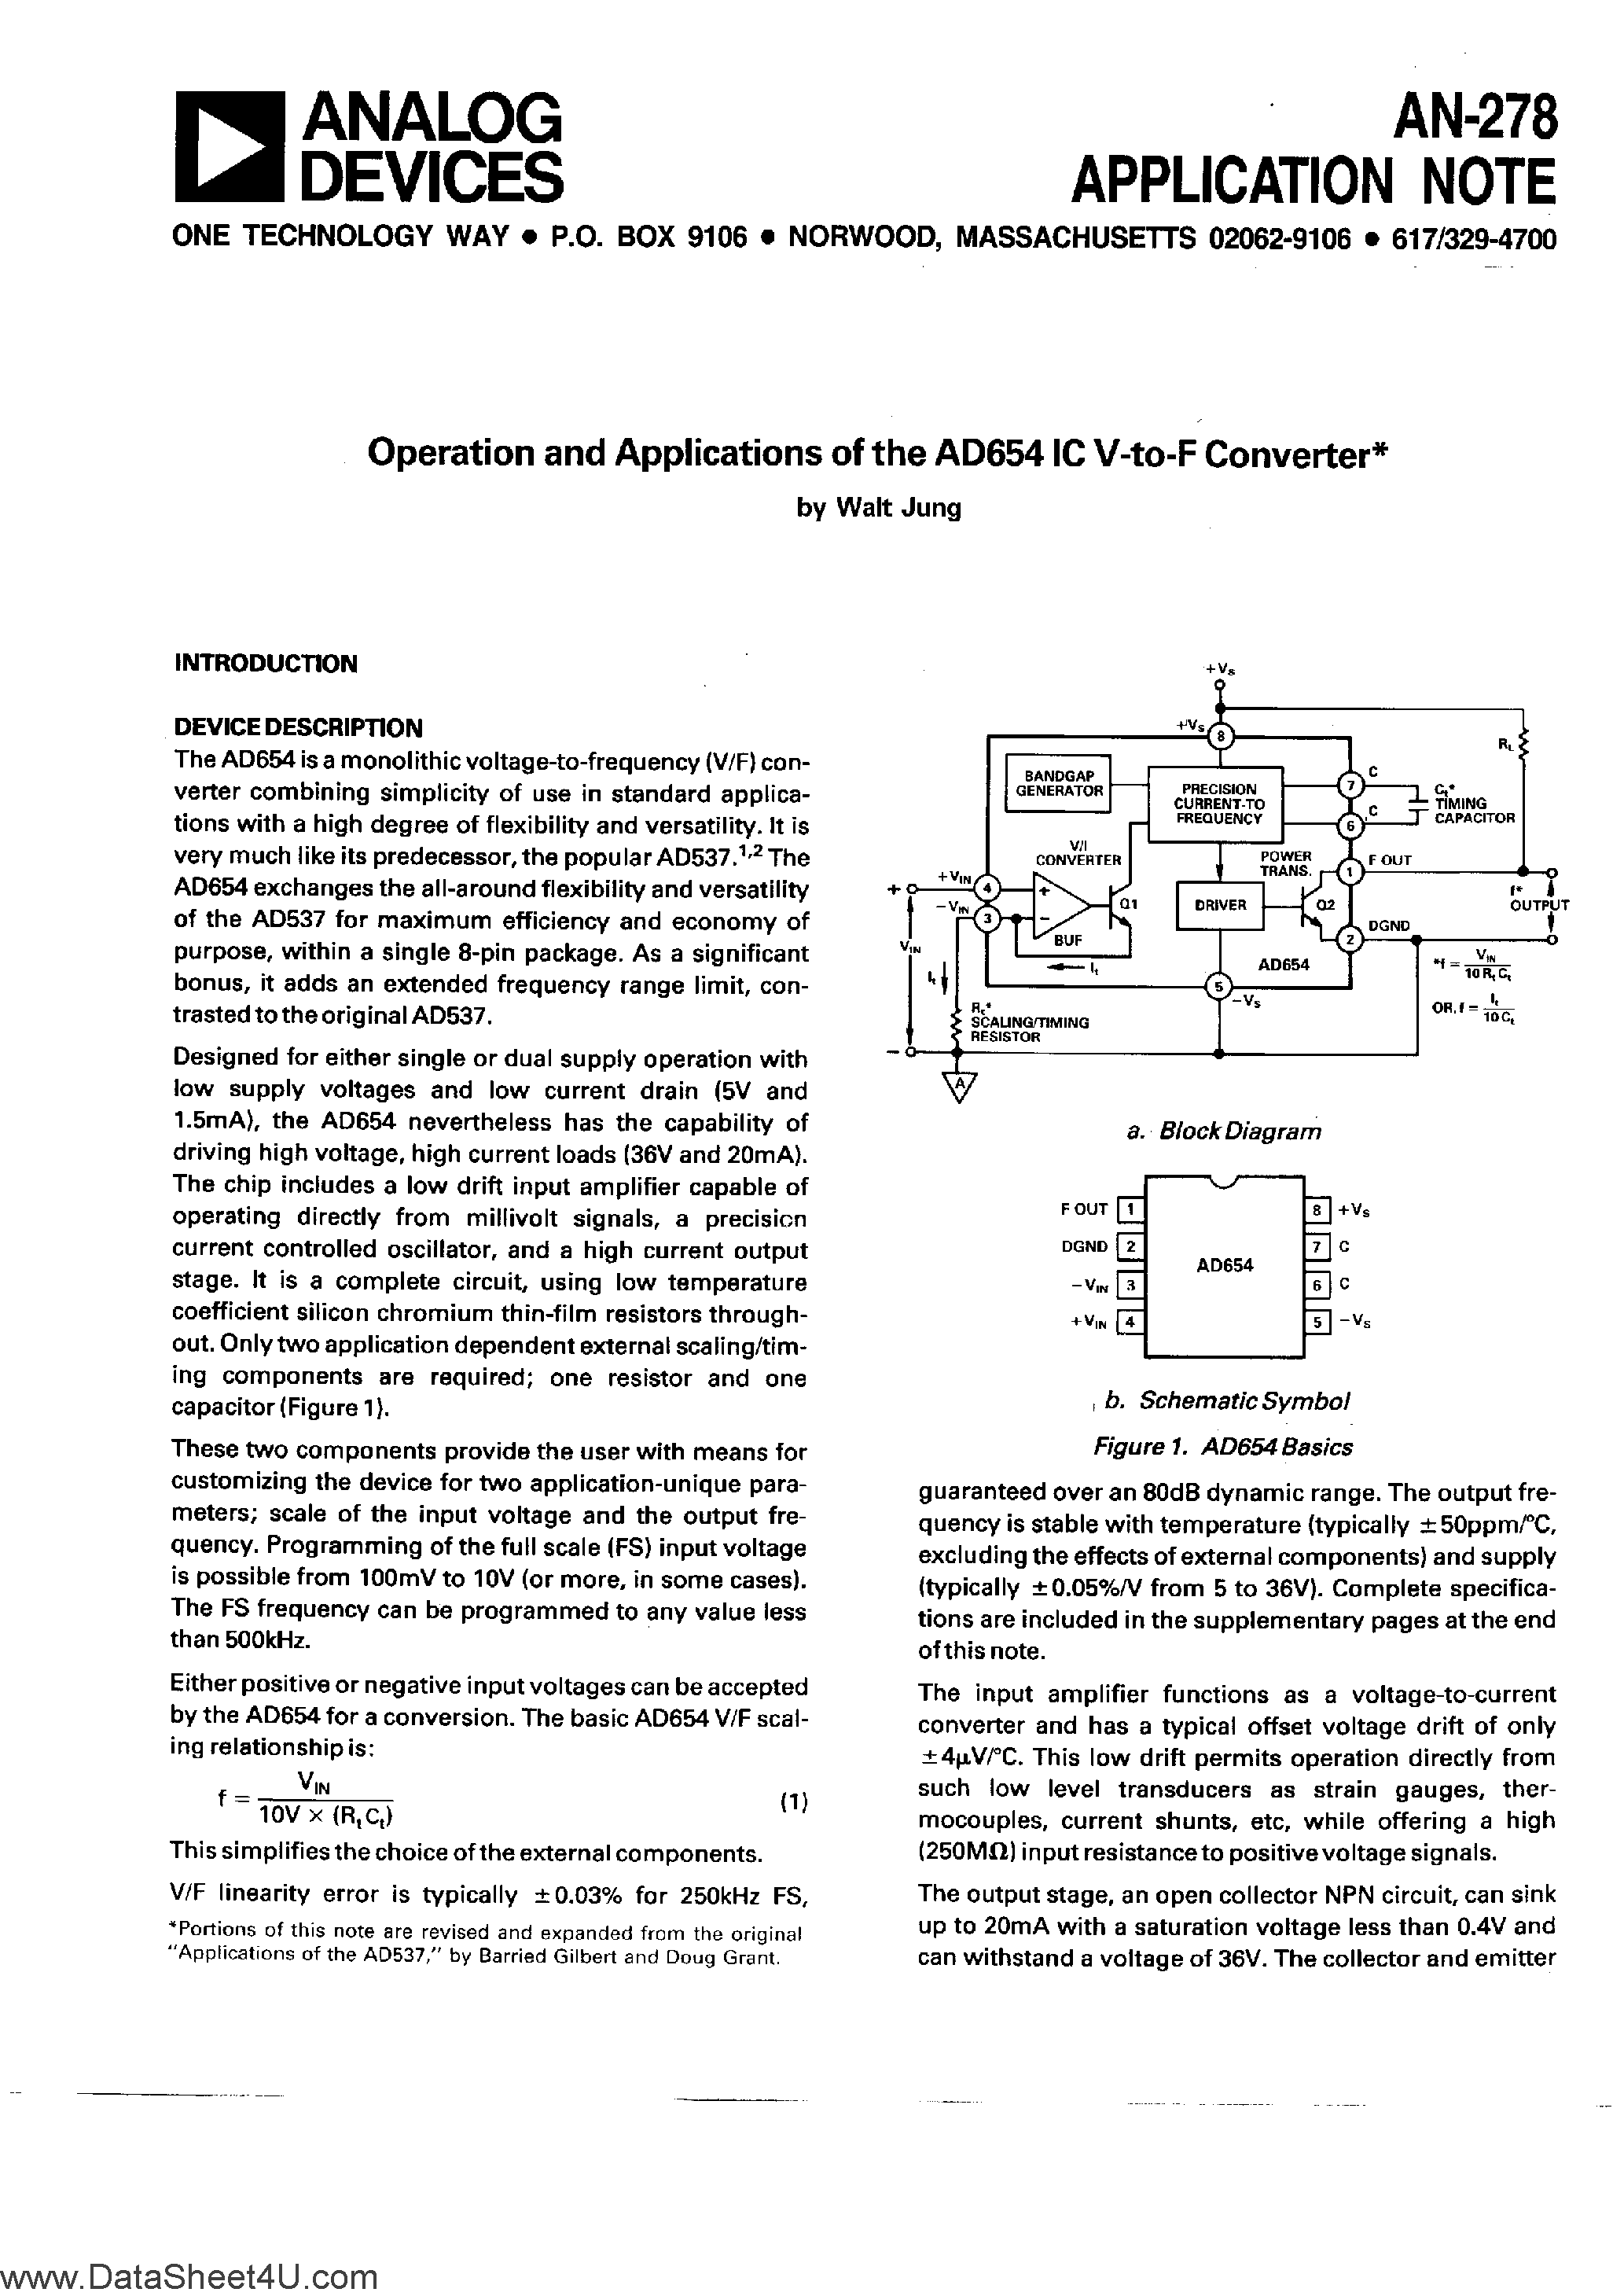 Даташит AN278 - Operation and Applications of the AD654 IC V to F Converter страница 1